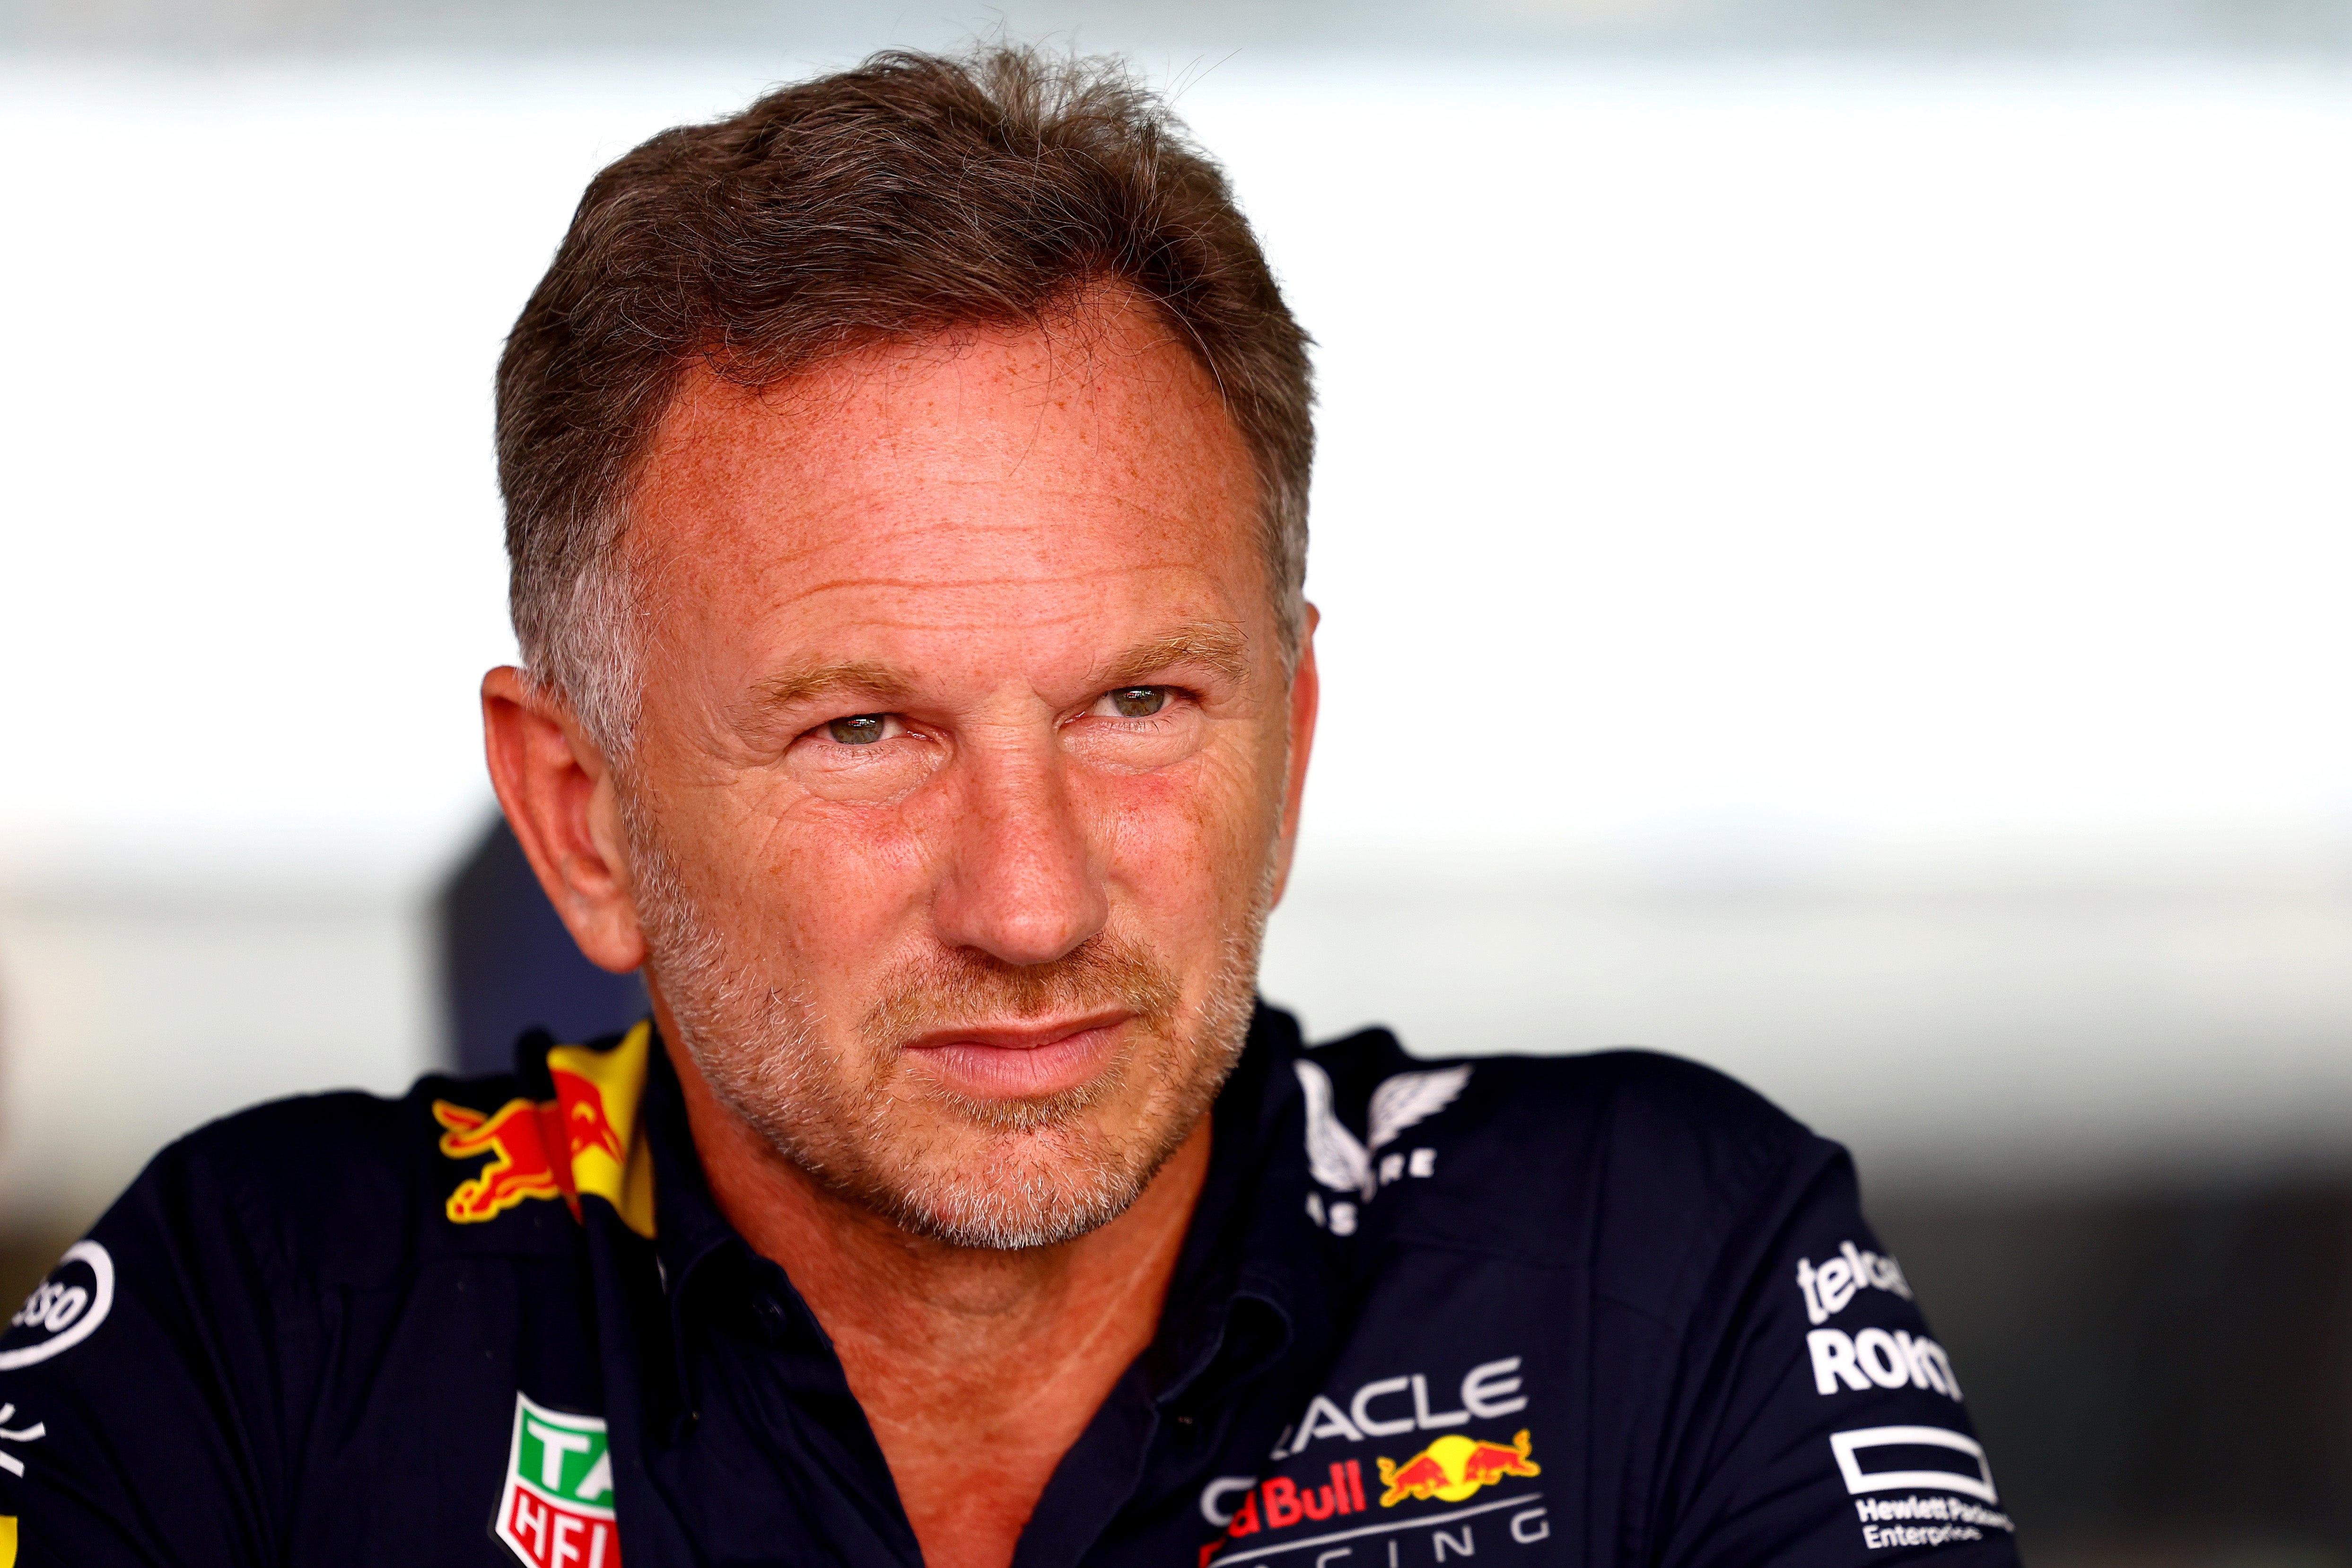 Christian Horner will be present at Red Bull’s launch event on Thursday